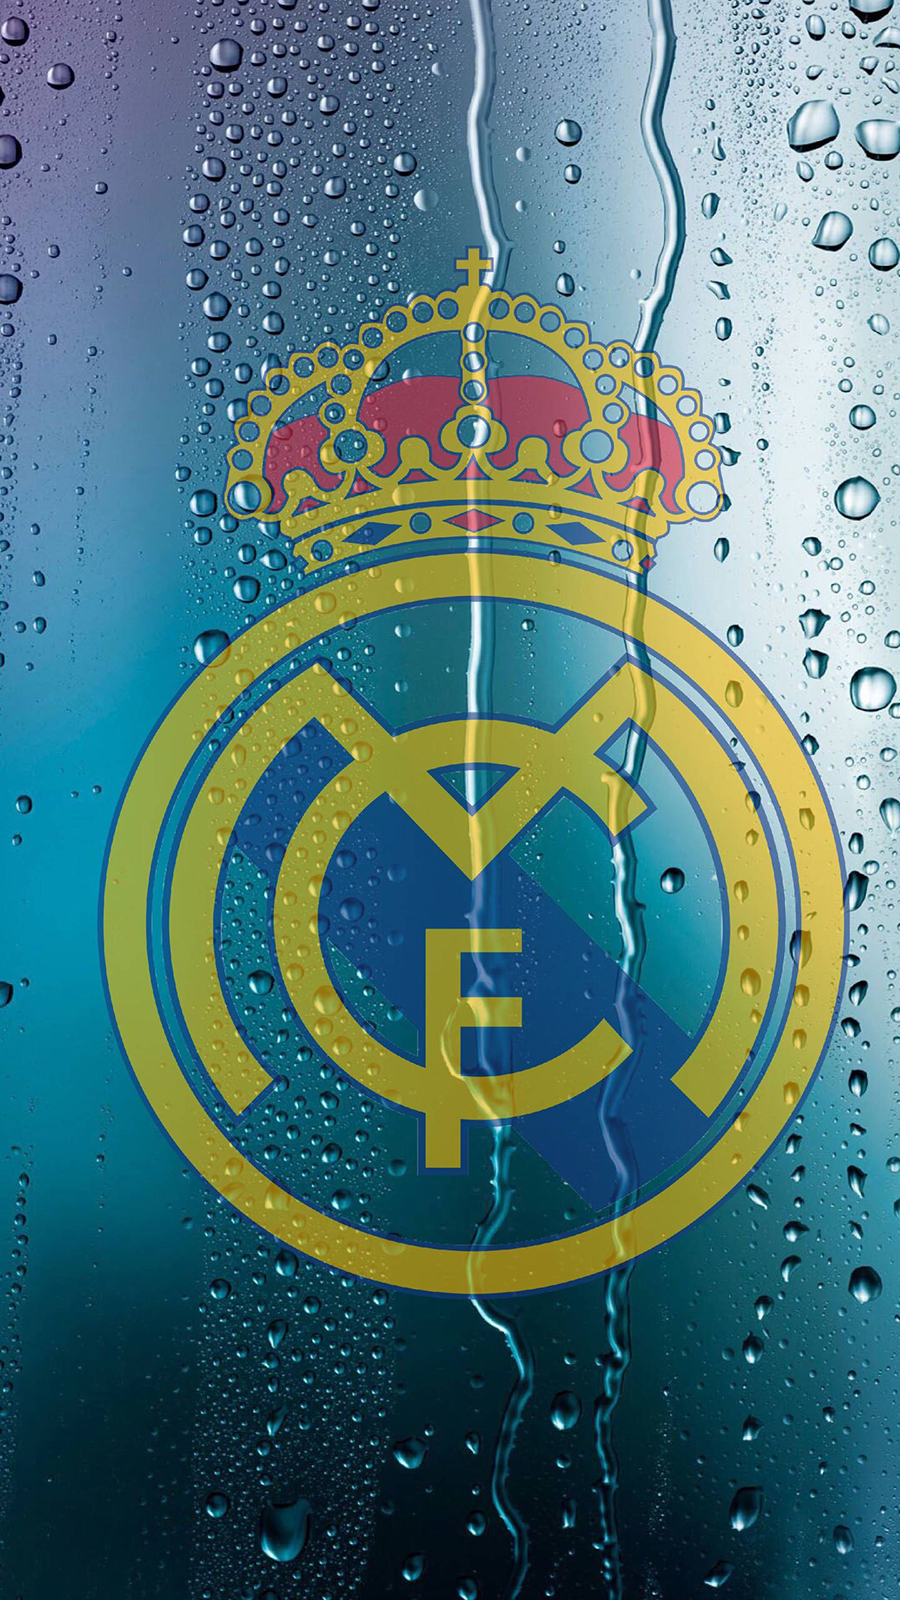 Real madrid logo full hd wallpapers now download